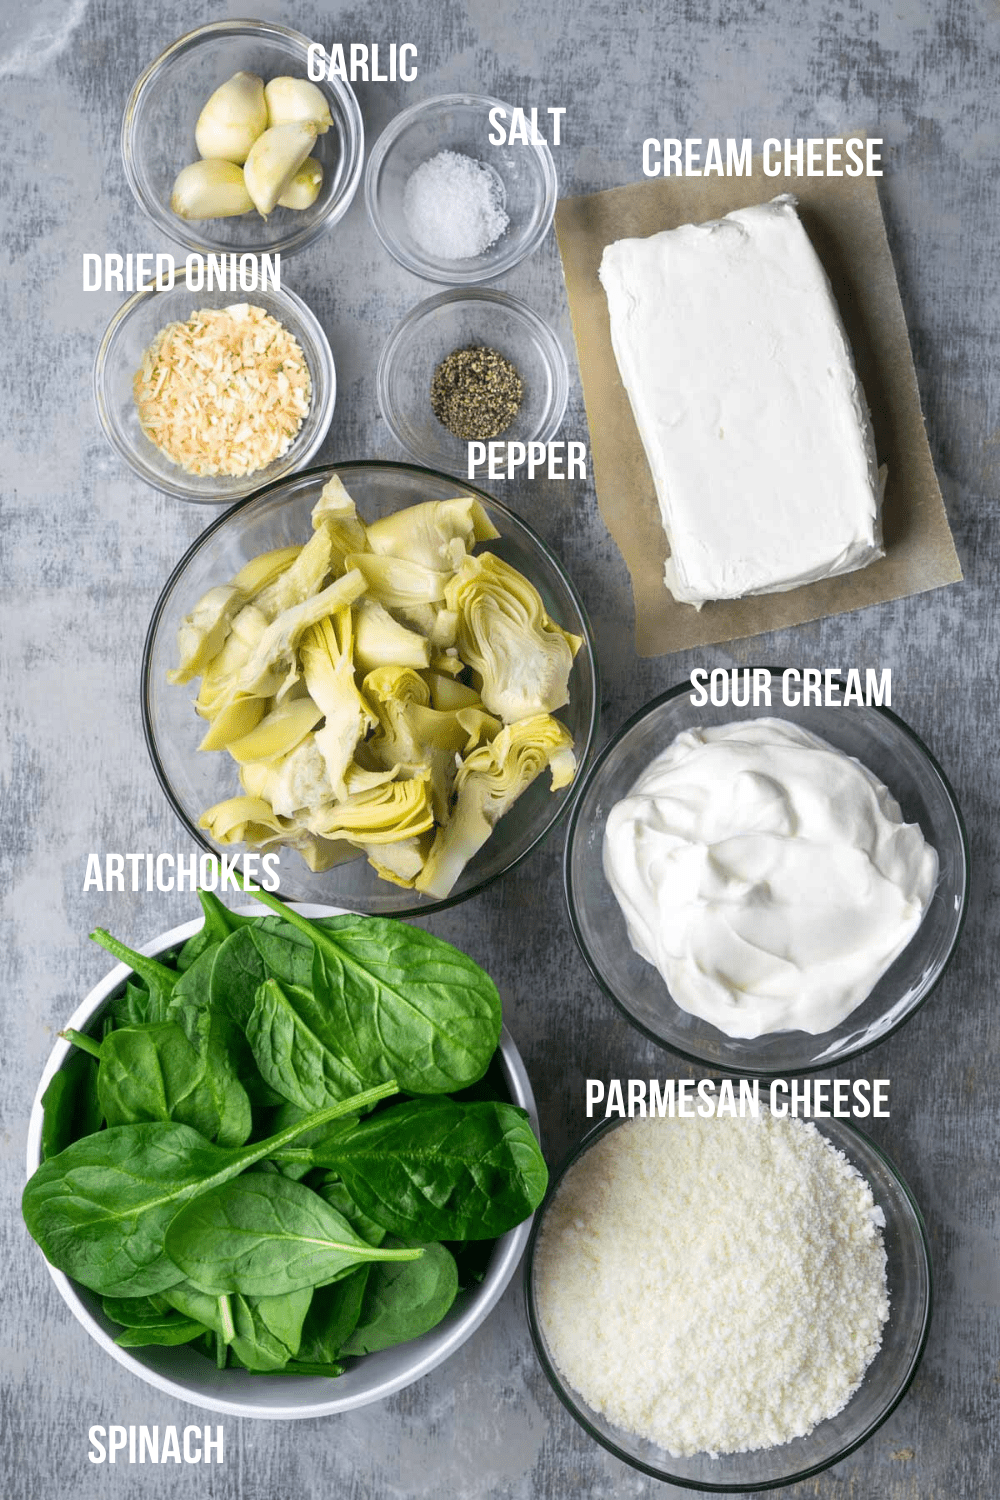 Overhead view of spinach artichoke dip ingredients with labels